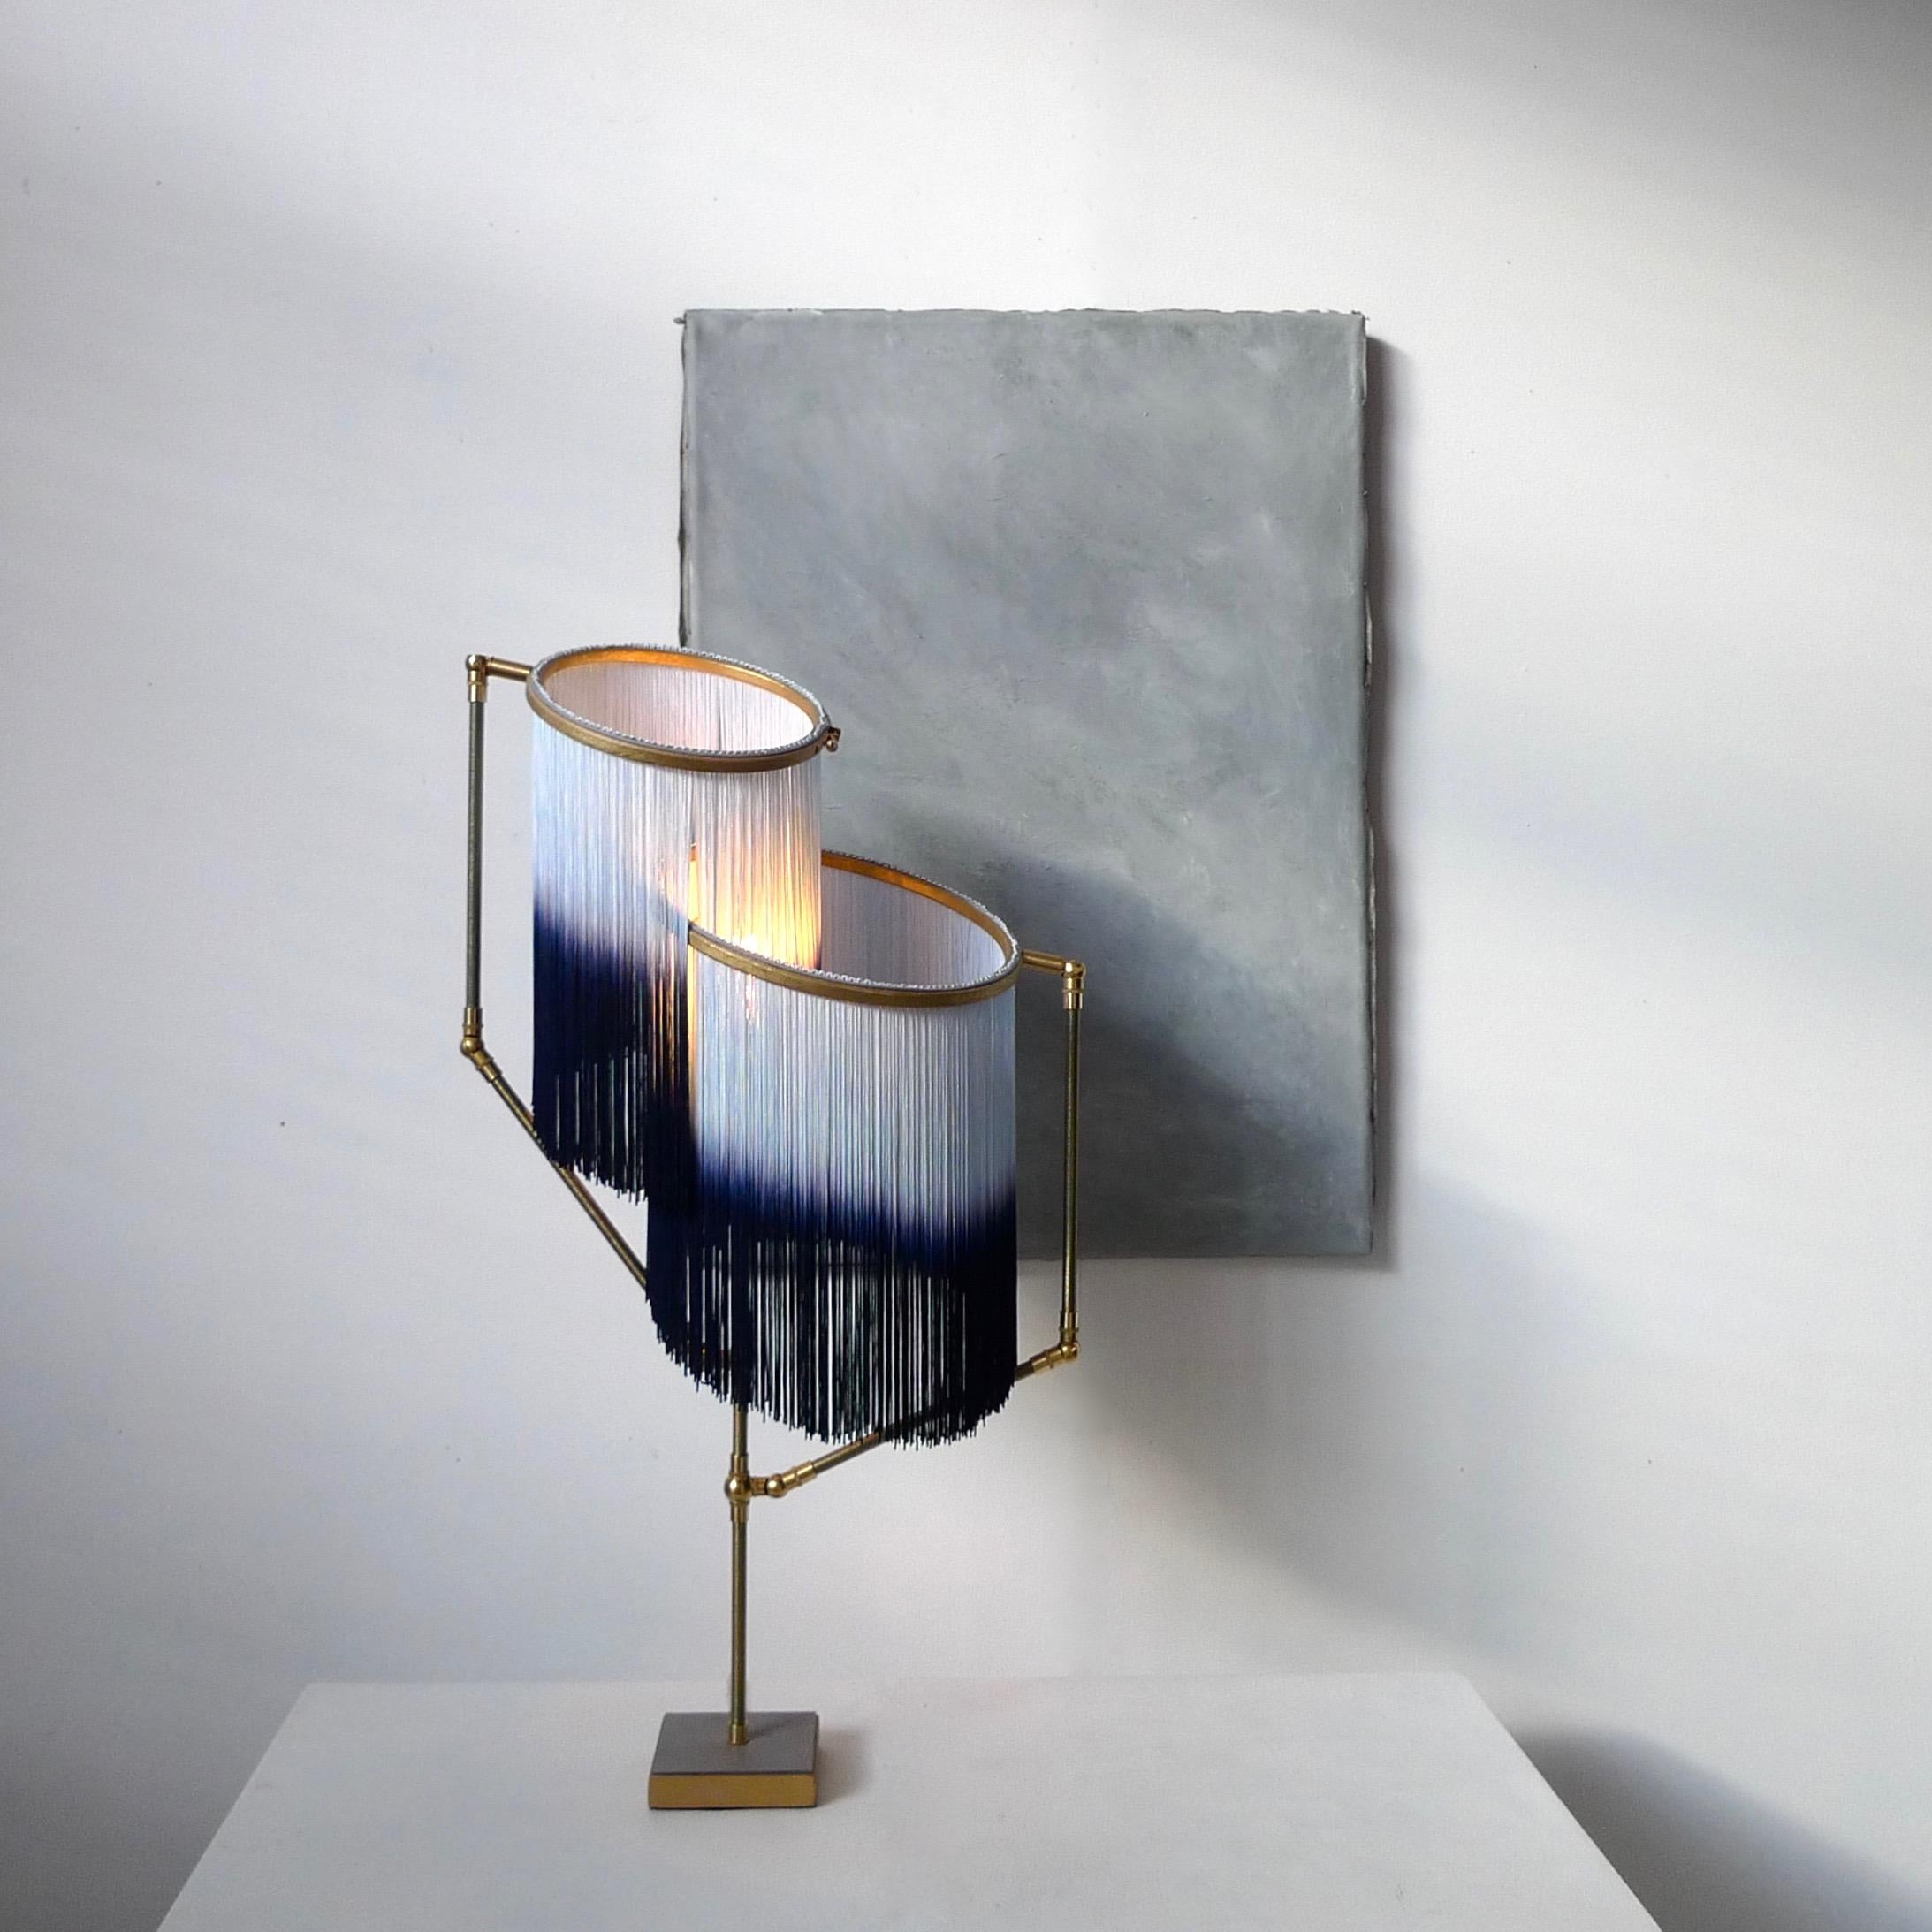 Blue Charme table lamp, Sander Bottinga

Dimensions: H 73 x W 38 x D 25 cm
Handmade in brass, leather, wood and dip dyed colored Fringes in viscose.
The movable arms makes it possible to move the circles with fringes in different positions.
So you